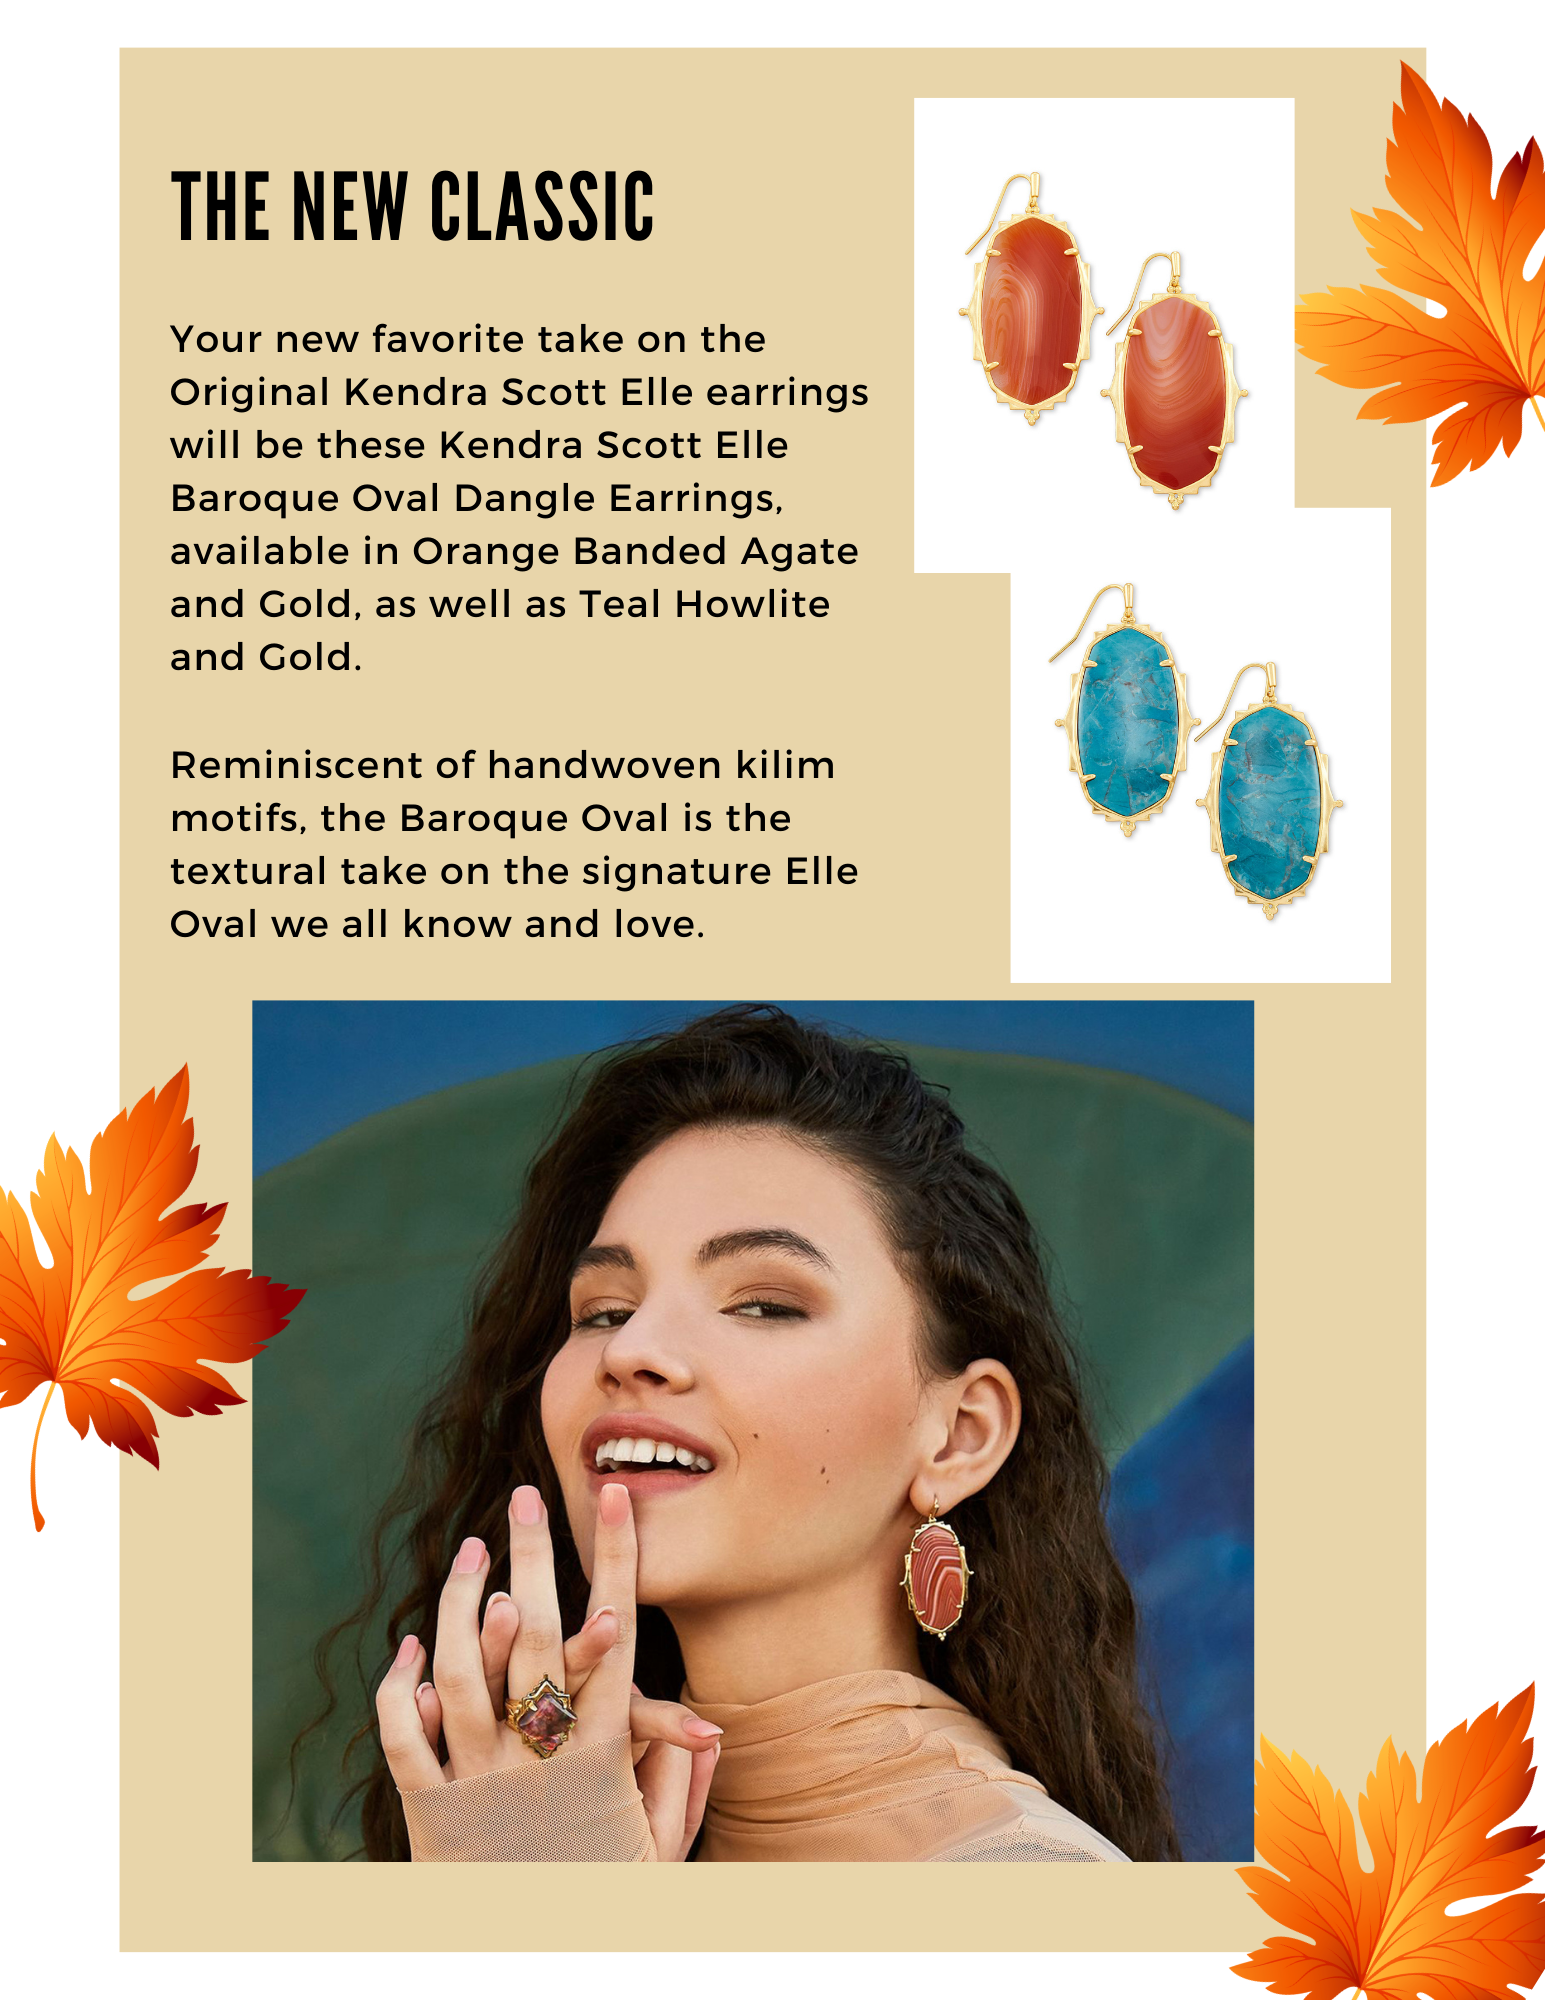 Kendra Scott Second Fall 2021 Collection The New Classic Baroque Elle Earrings